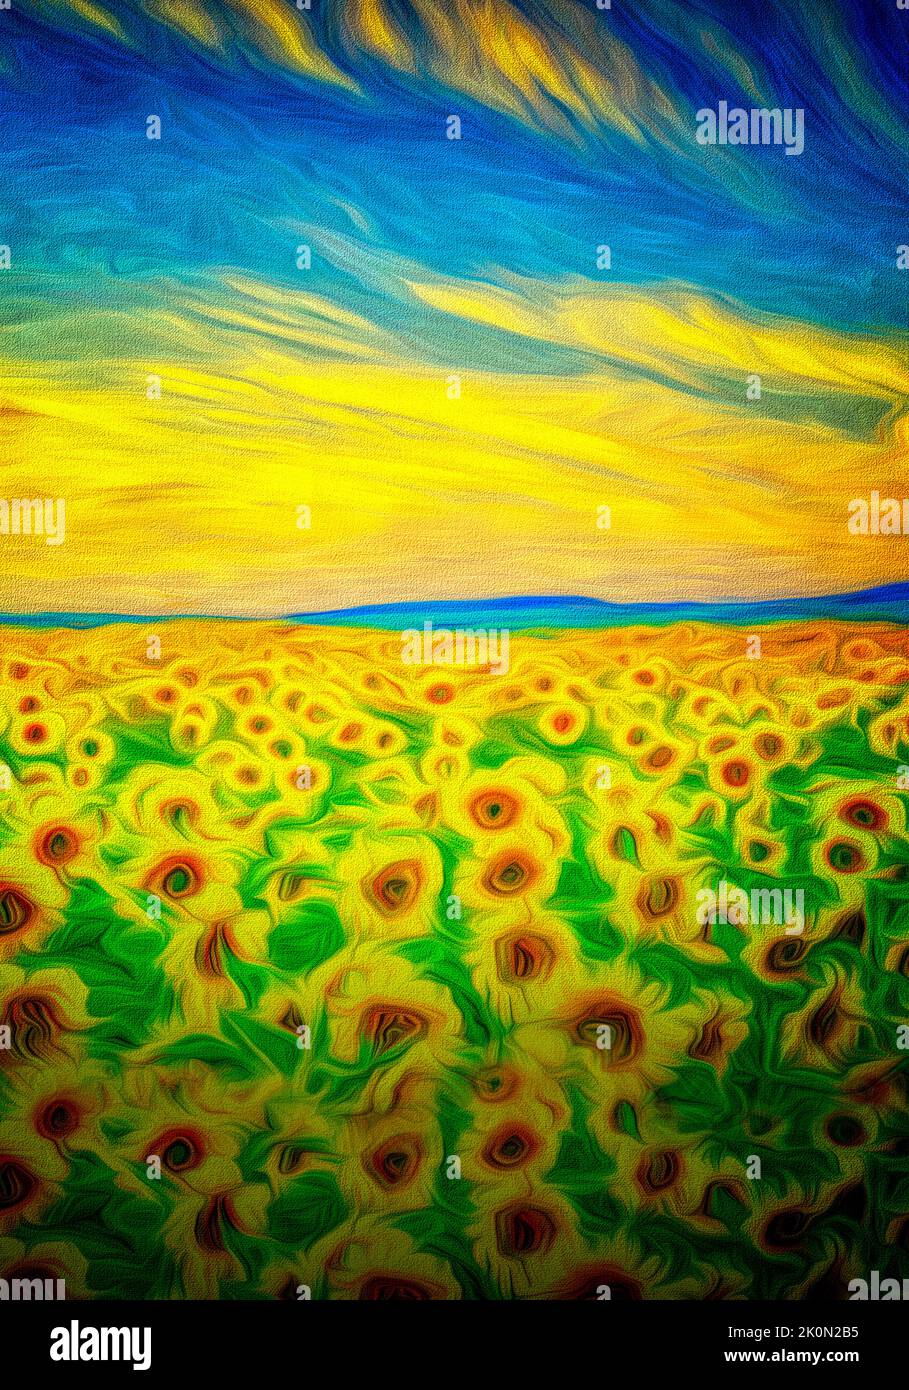 CONTEMPORARY ART: Sunflowers in Provence, France by Edmund Nagele F.R.P.S. Stock Photo